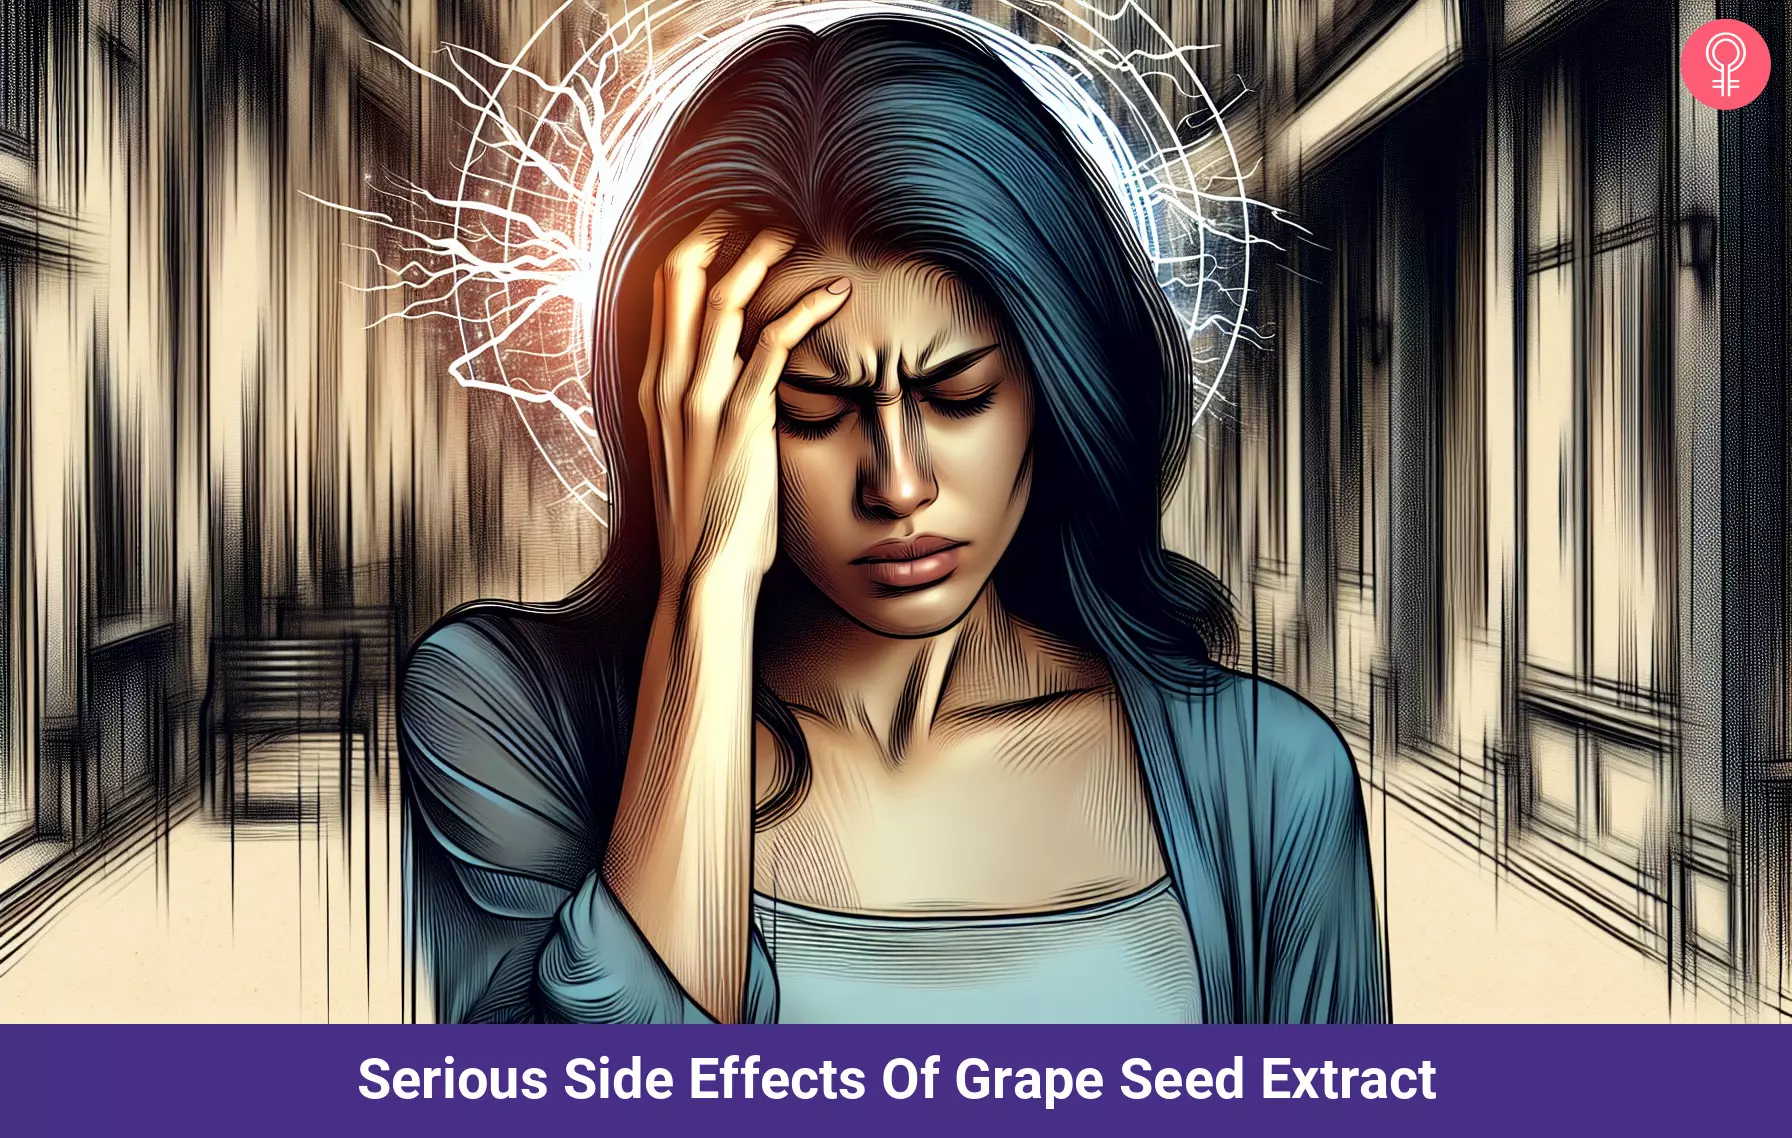 6 Serious Side Effects Of Grape Seed Extract